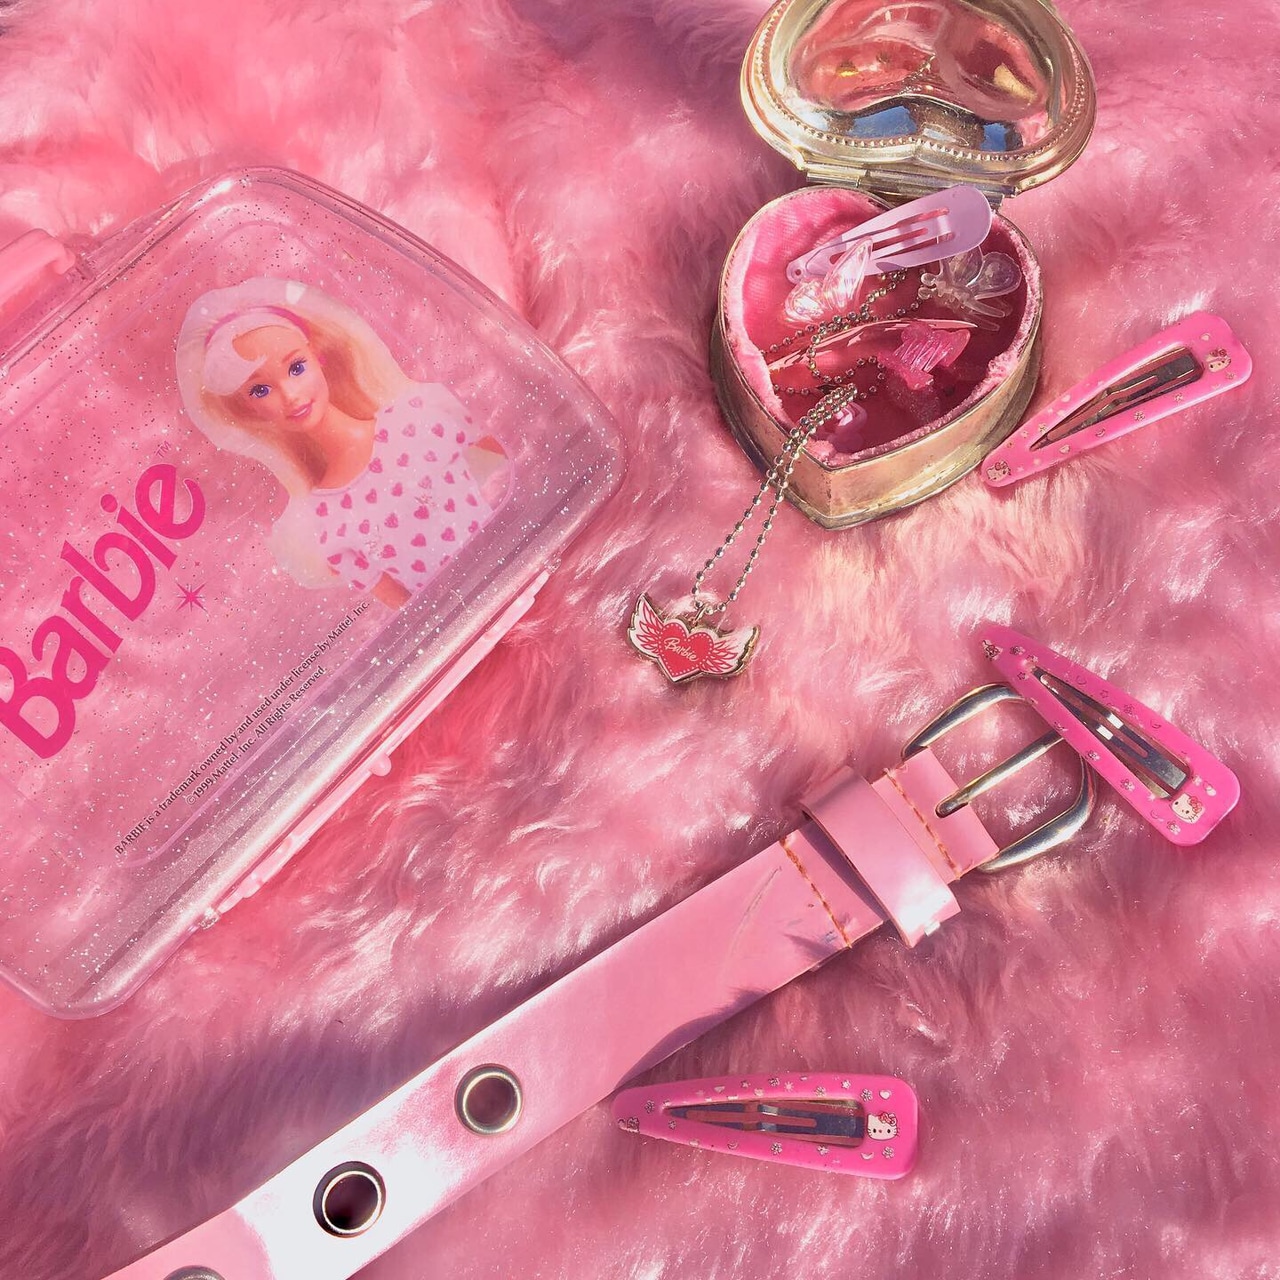 image about barbiecore aesthetic. See more about pink, aesthetic and girly